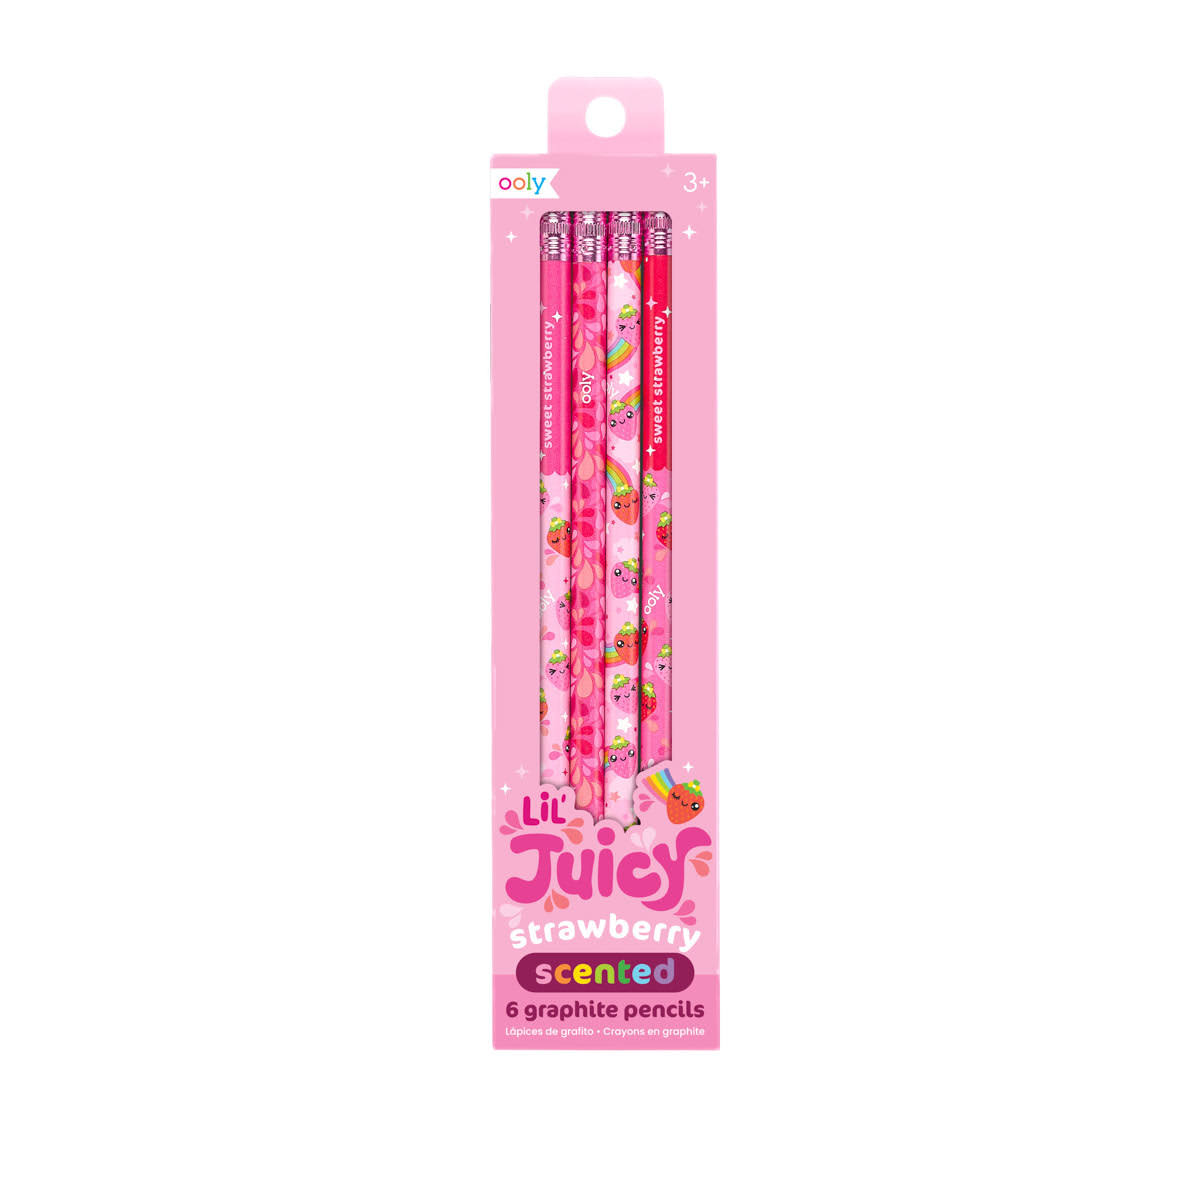 Ooly Lil' Juicy Strawberry Scented Graphite Pencils, Pack of 6